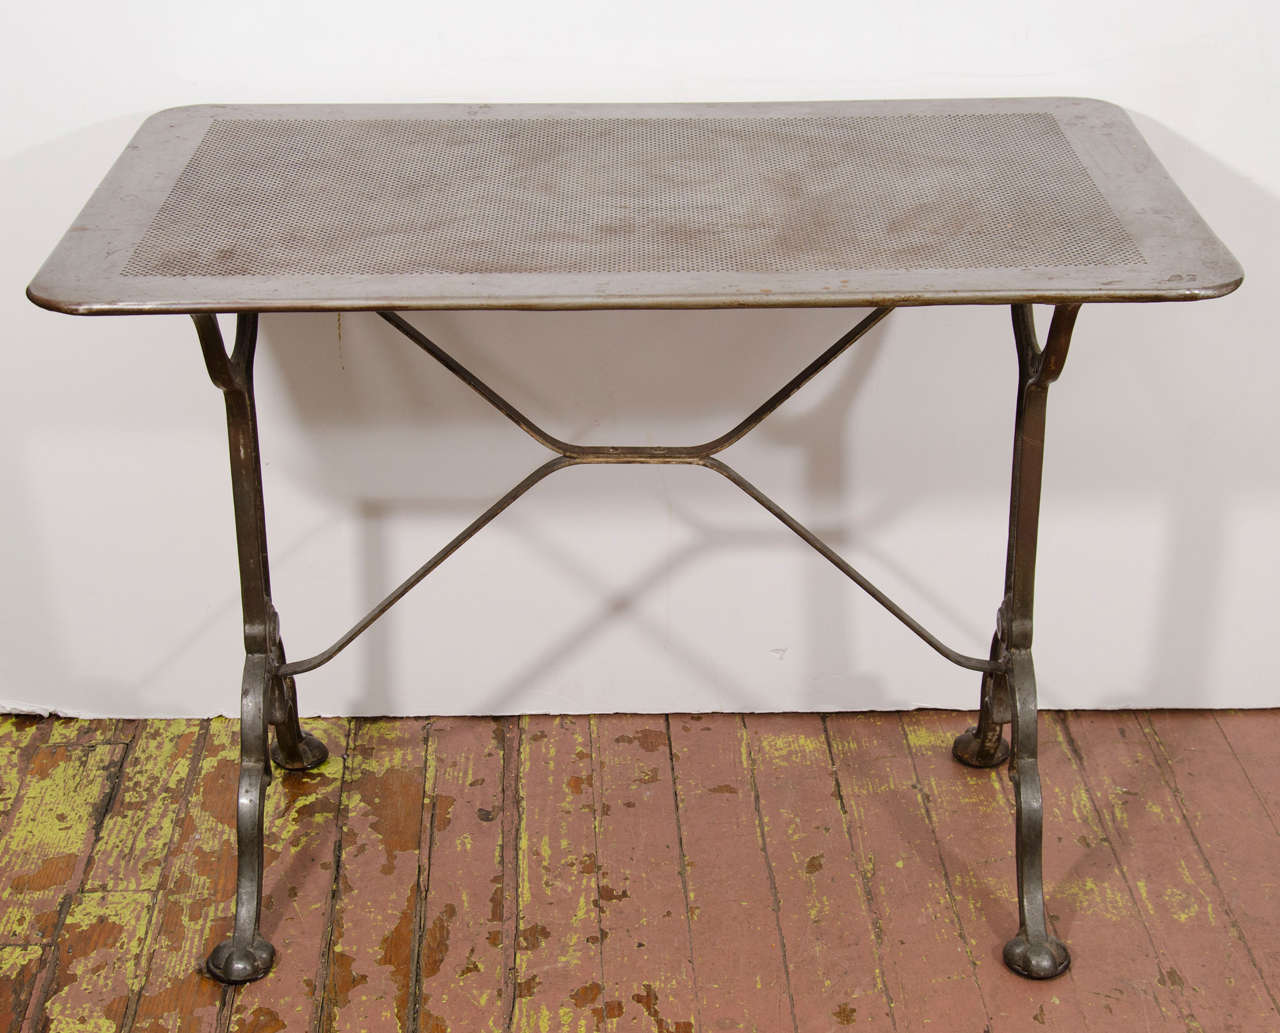 Perforated zinc top bistro table with rounded corners from the south of France